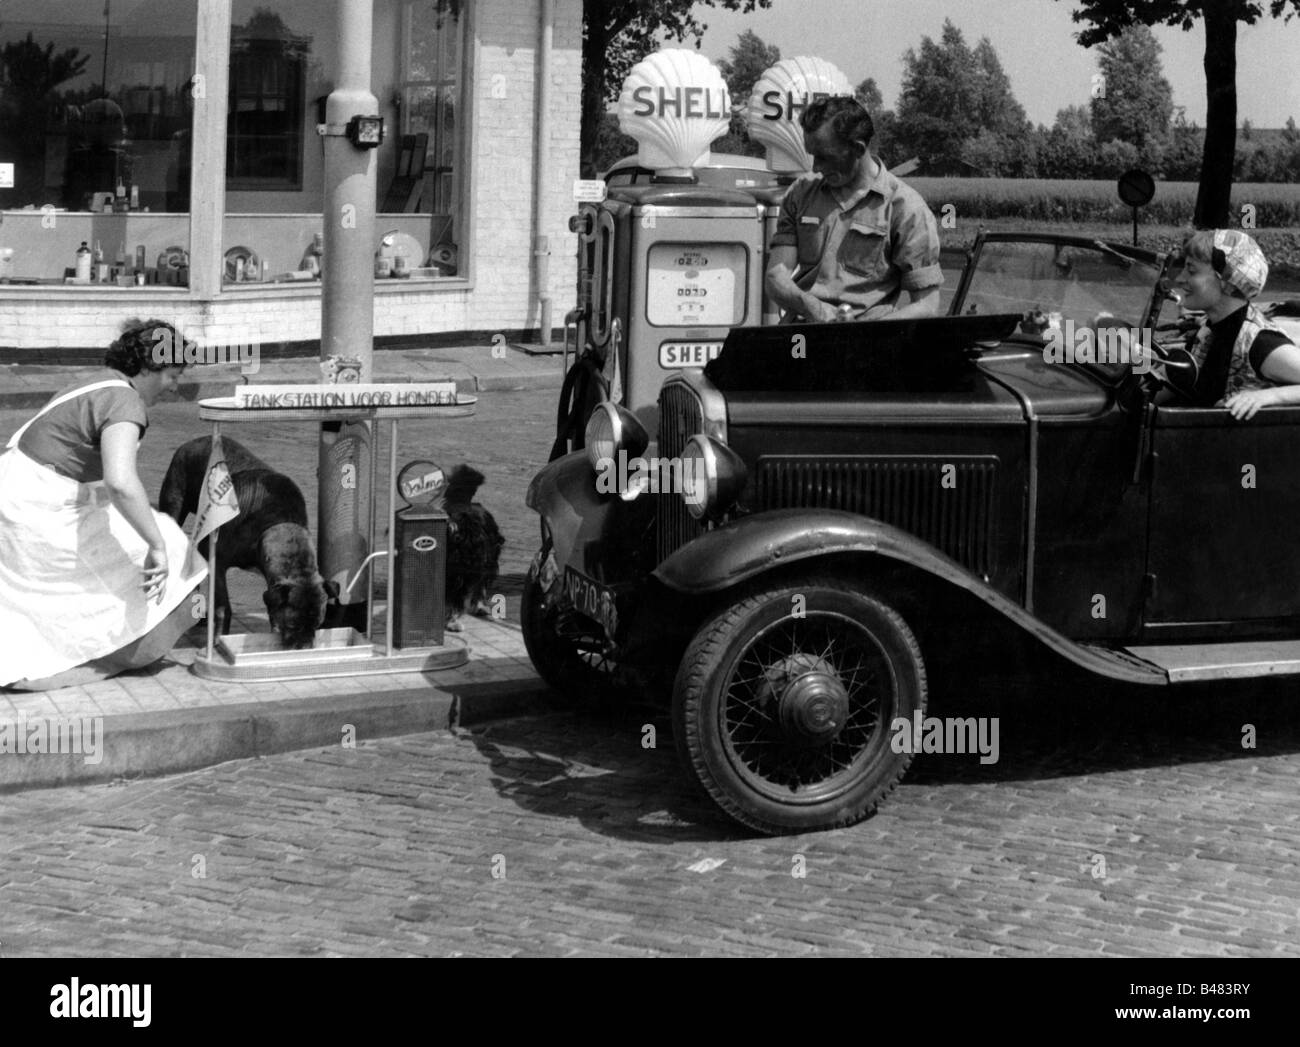 transport / transportation, cars, filling stations, Shell, attendent, woman in car, dog, Netherlands, 1950s, , Stock Photo